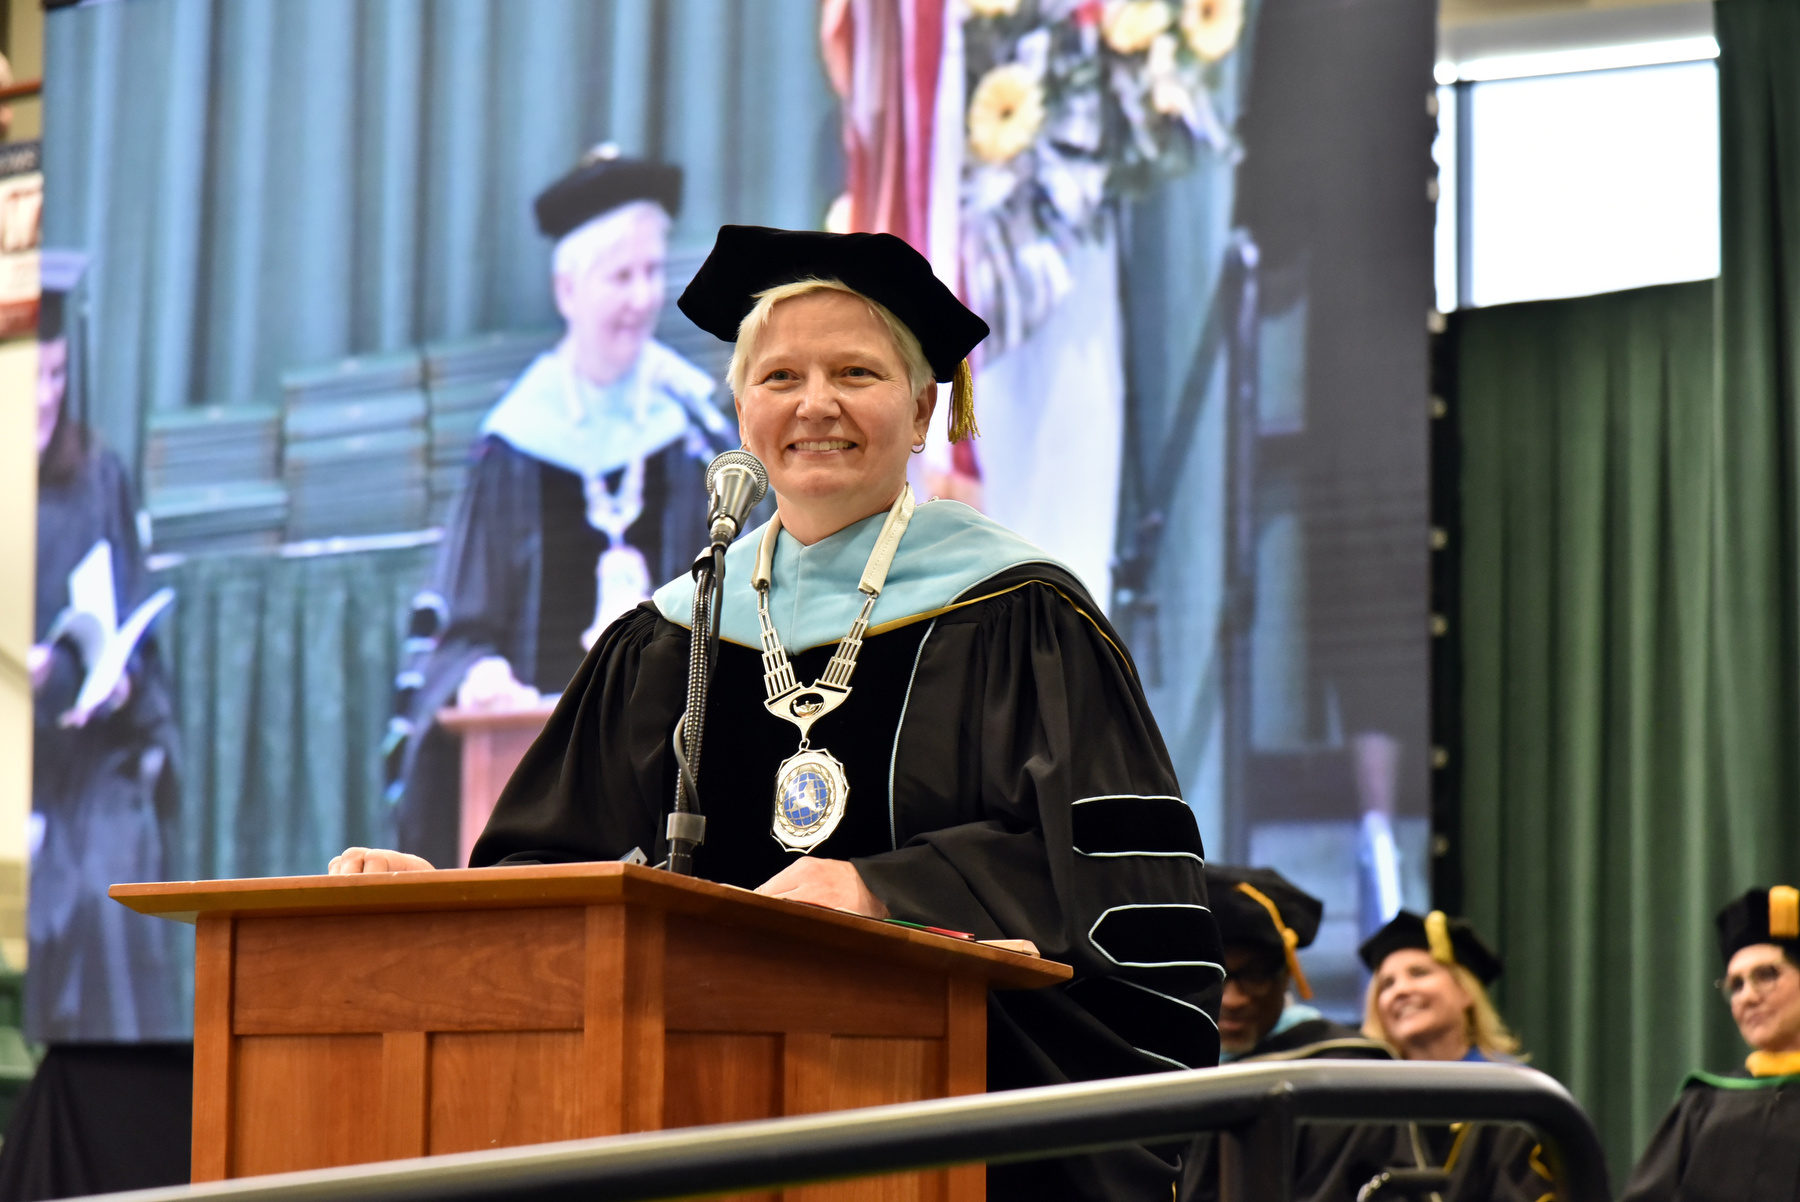 Officer in Charge Mary C. Toale provided the Charge to the Graduates for the May 13 Commencement ceremonies.